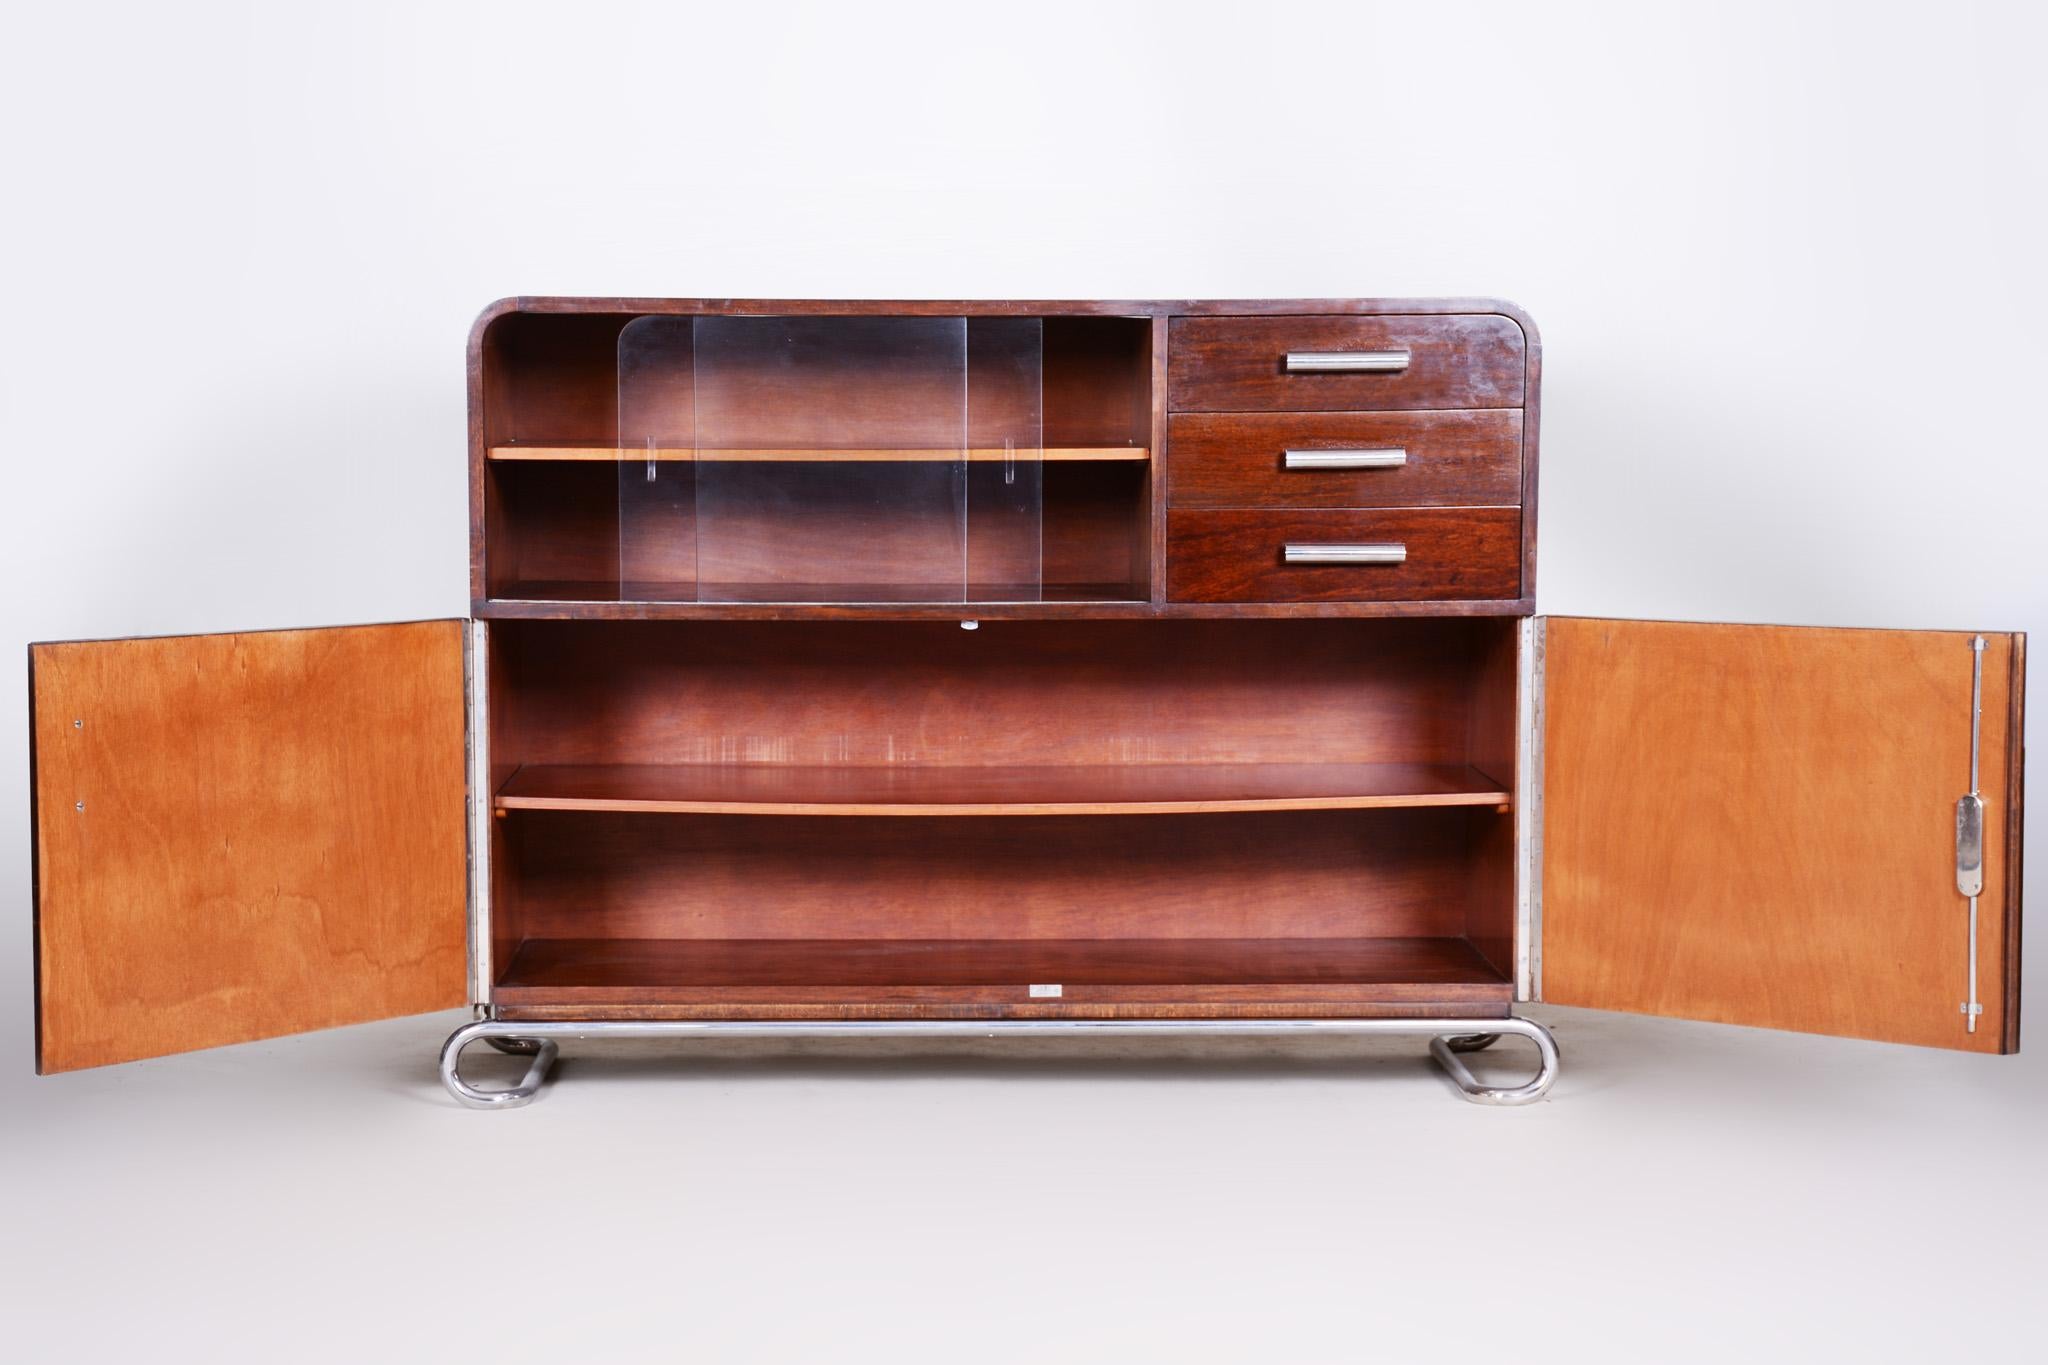 Bauhaus sideboard with drawers, cabinet.
Original well preserved condition.
Country of origin is Czechia (Czechoslovakia) from period 1930-1939.
Material: Mahogany chrome-plated steel and glass

Maker: Mücke - Melder.